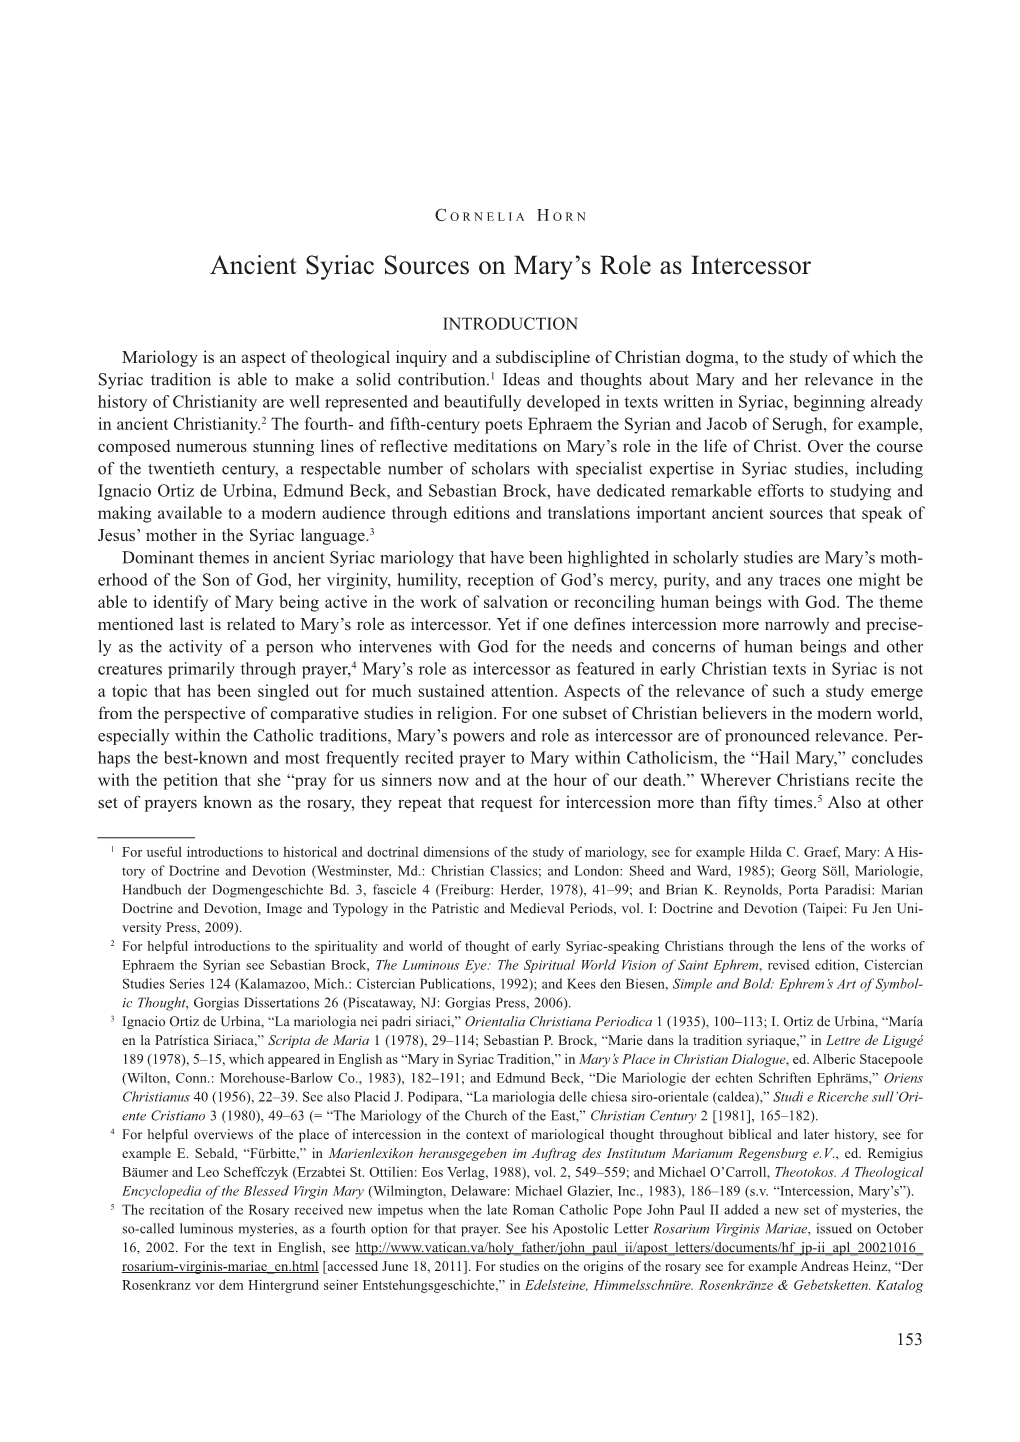 Ancient Syriac Sources on Mary's Role As Intercessor